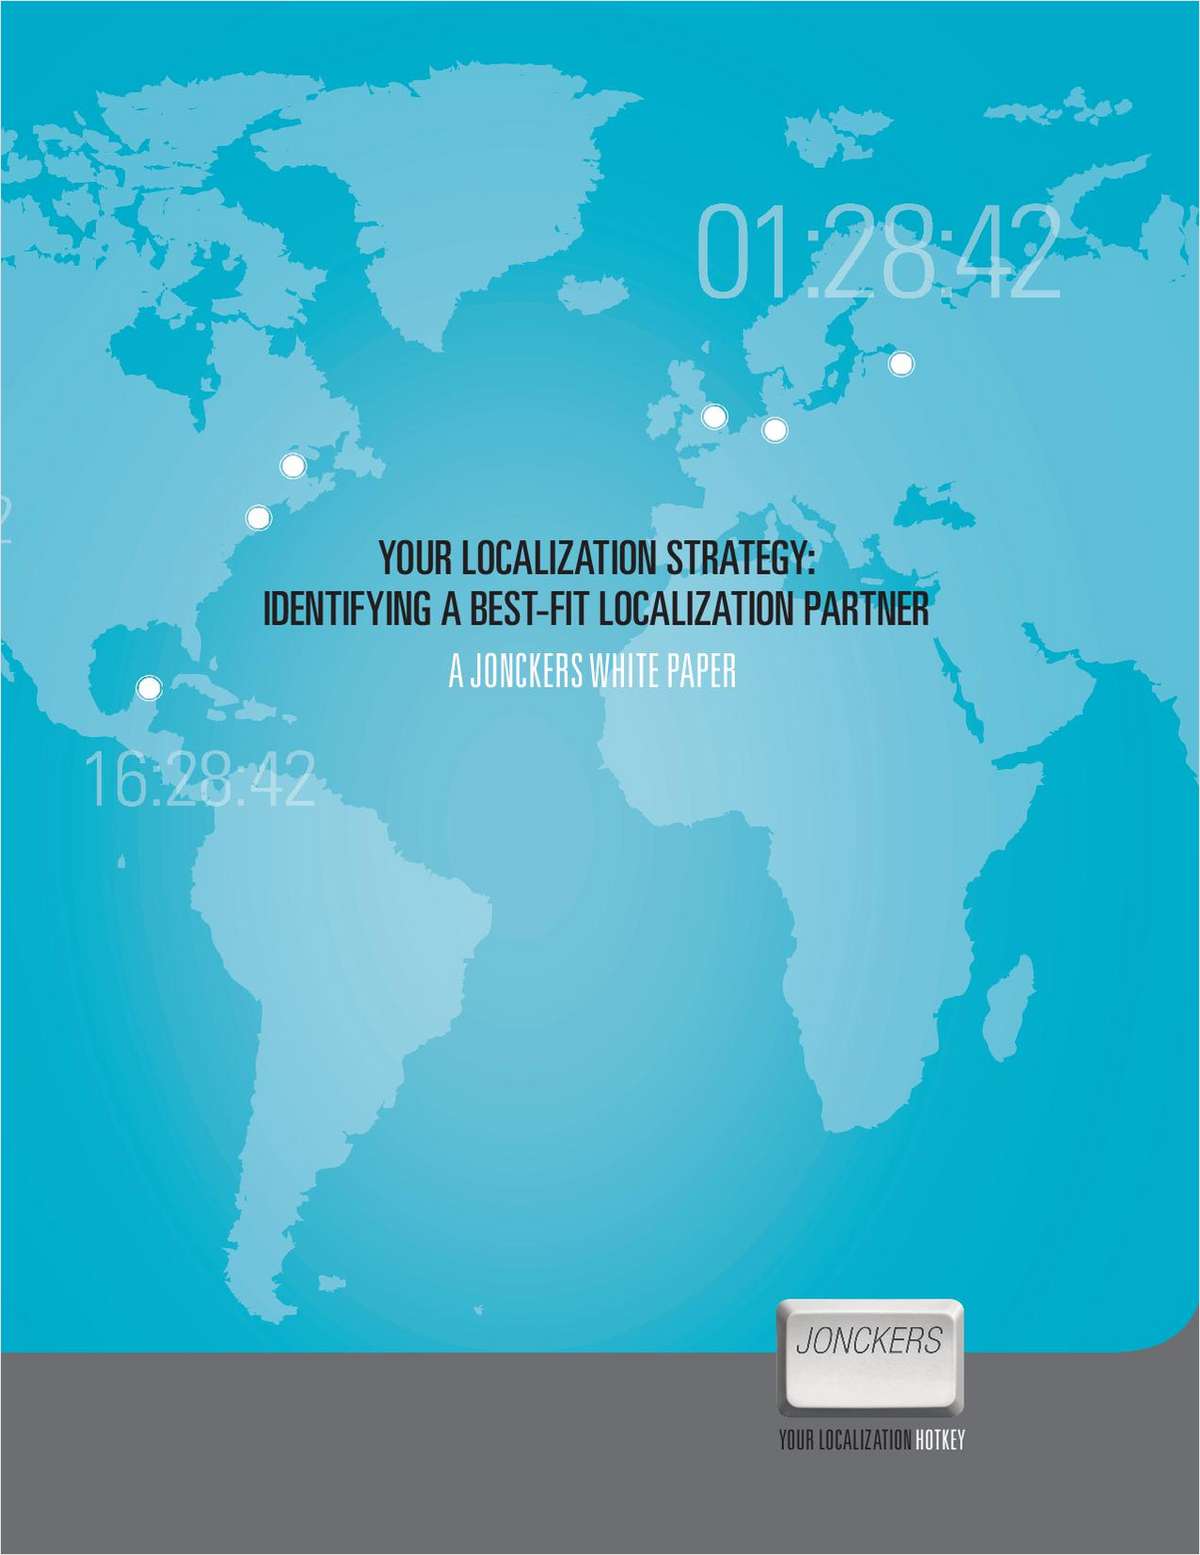 Your Localization Strategy: Identifying a Best-Fit Localization Partner